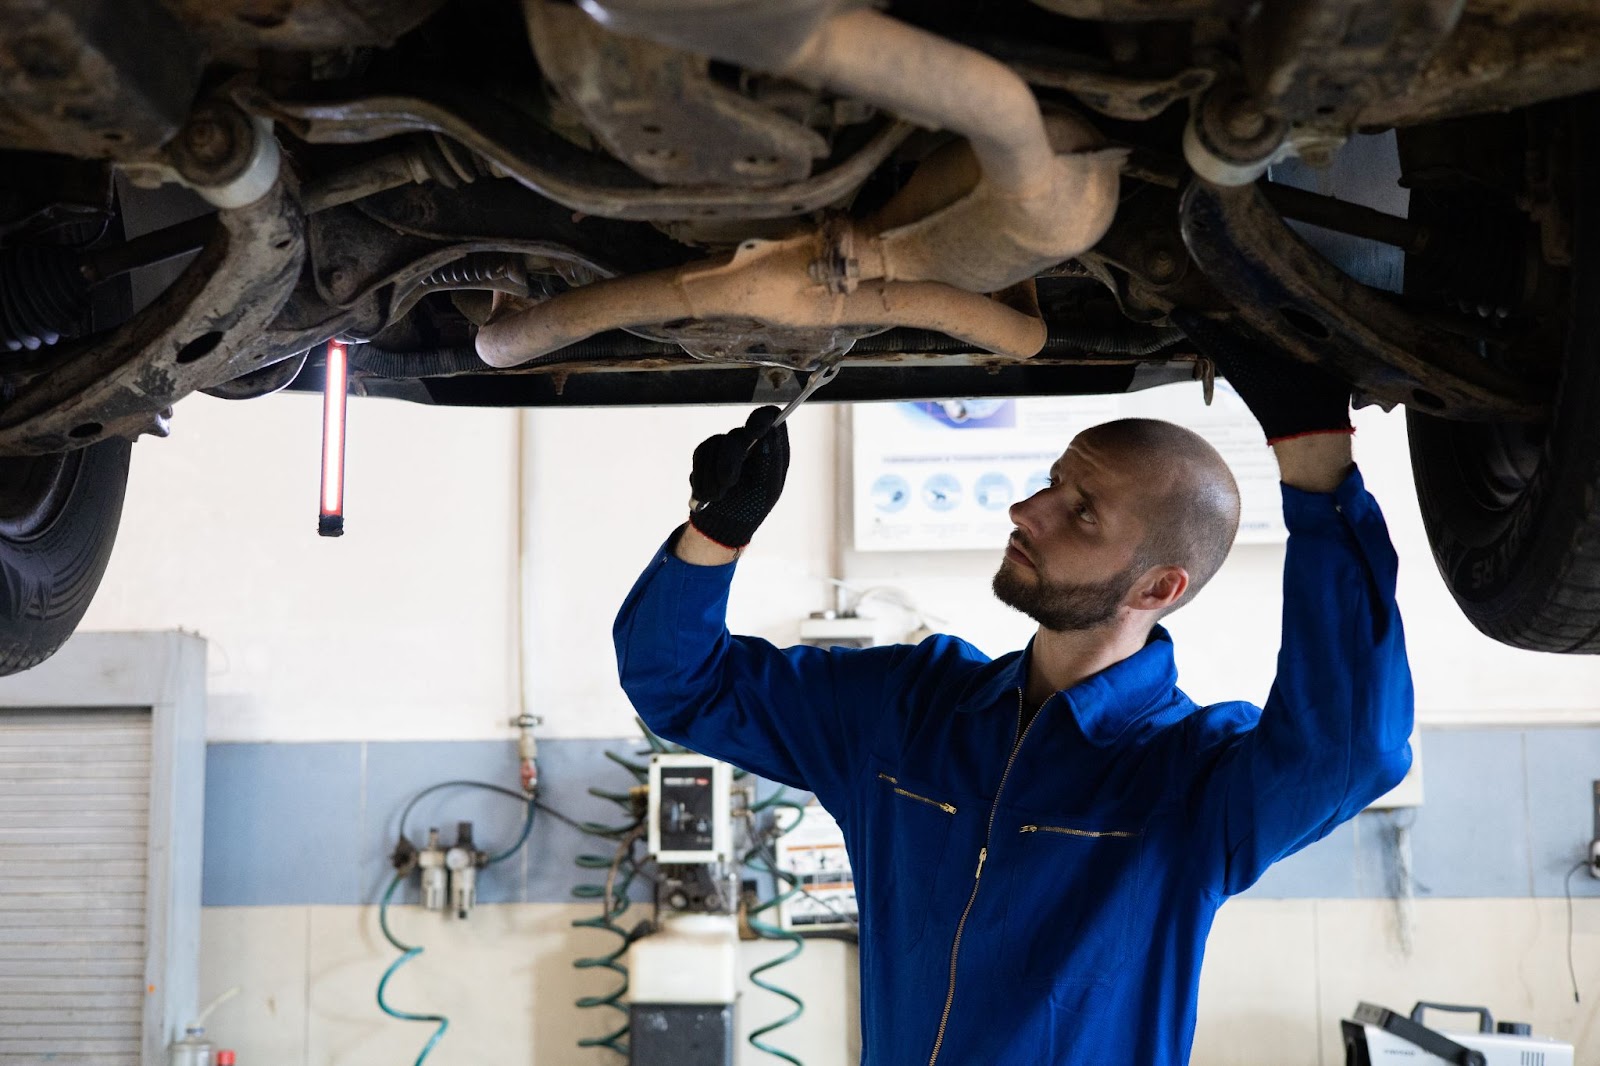 A mechanic underneath a vehicle working on the exhaust pipes underneath the vehicle